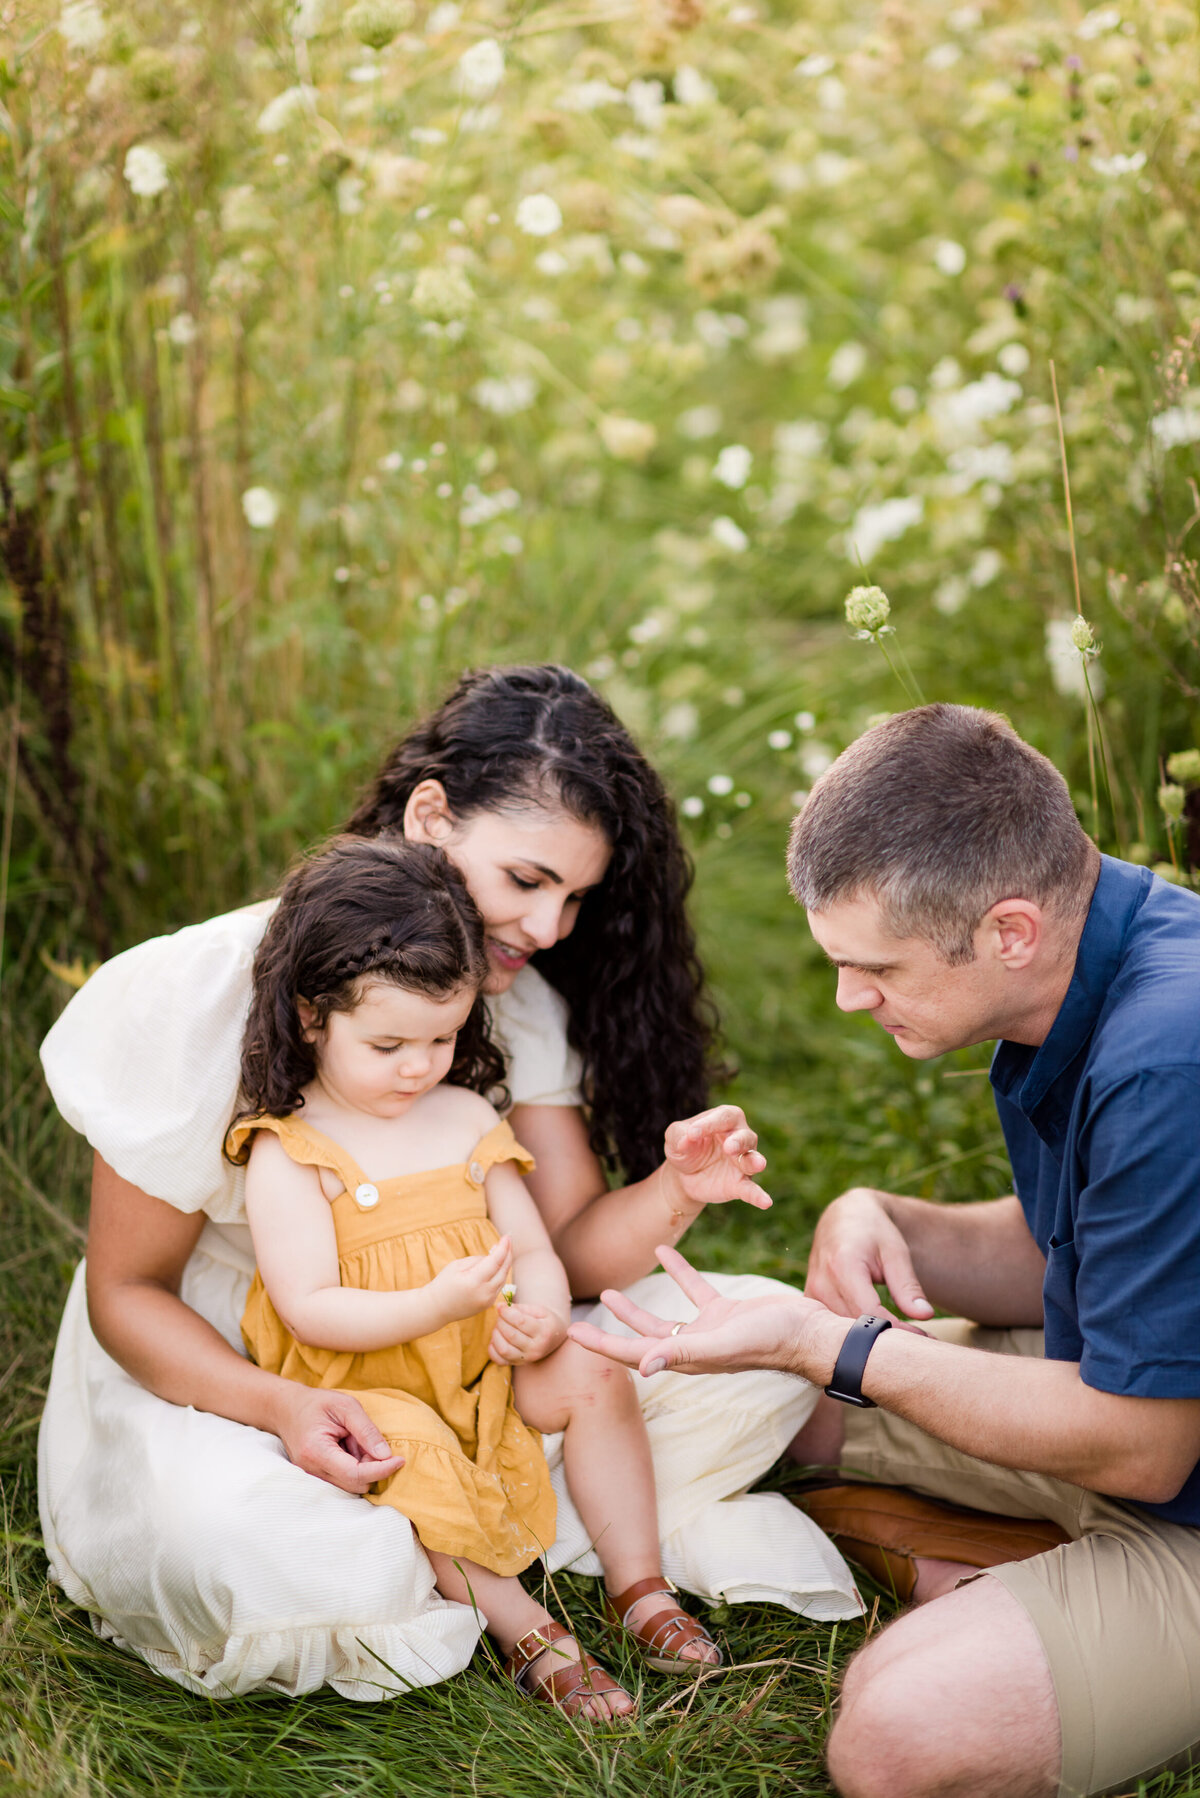 Boston-family-photographer-bella-wang-photography-Lifestyle-session-outdoor-wildflower-64